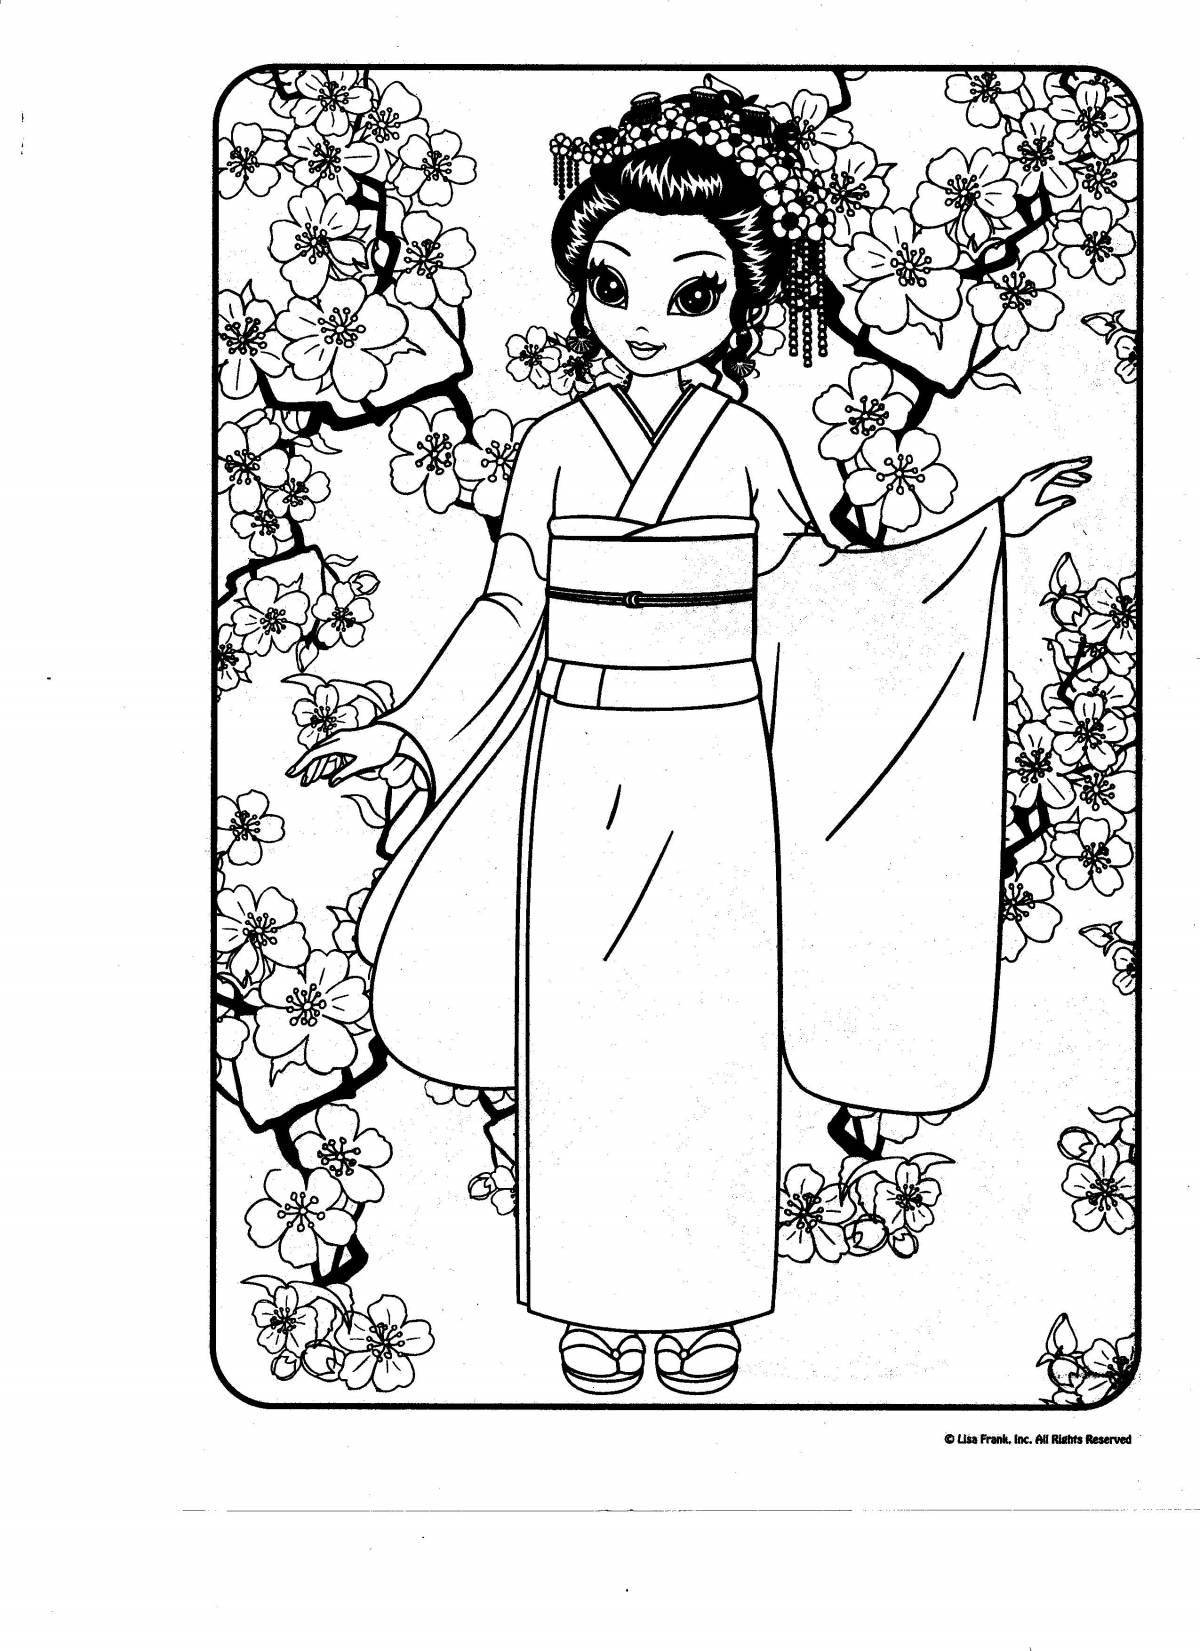 Coloring page charming japanese girl